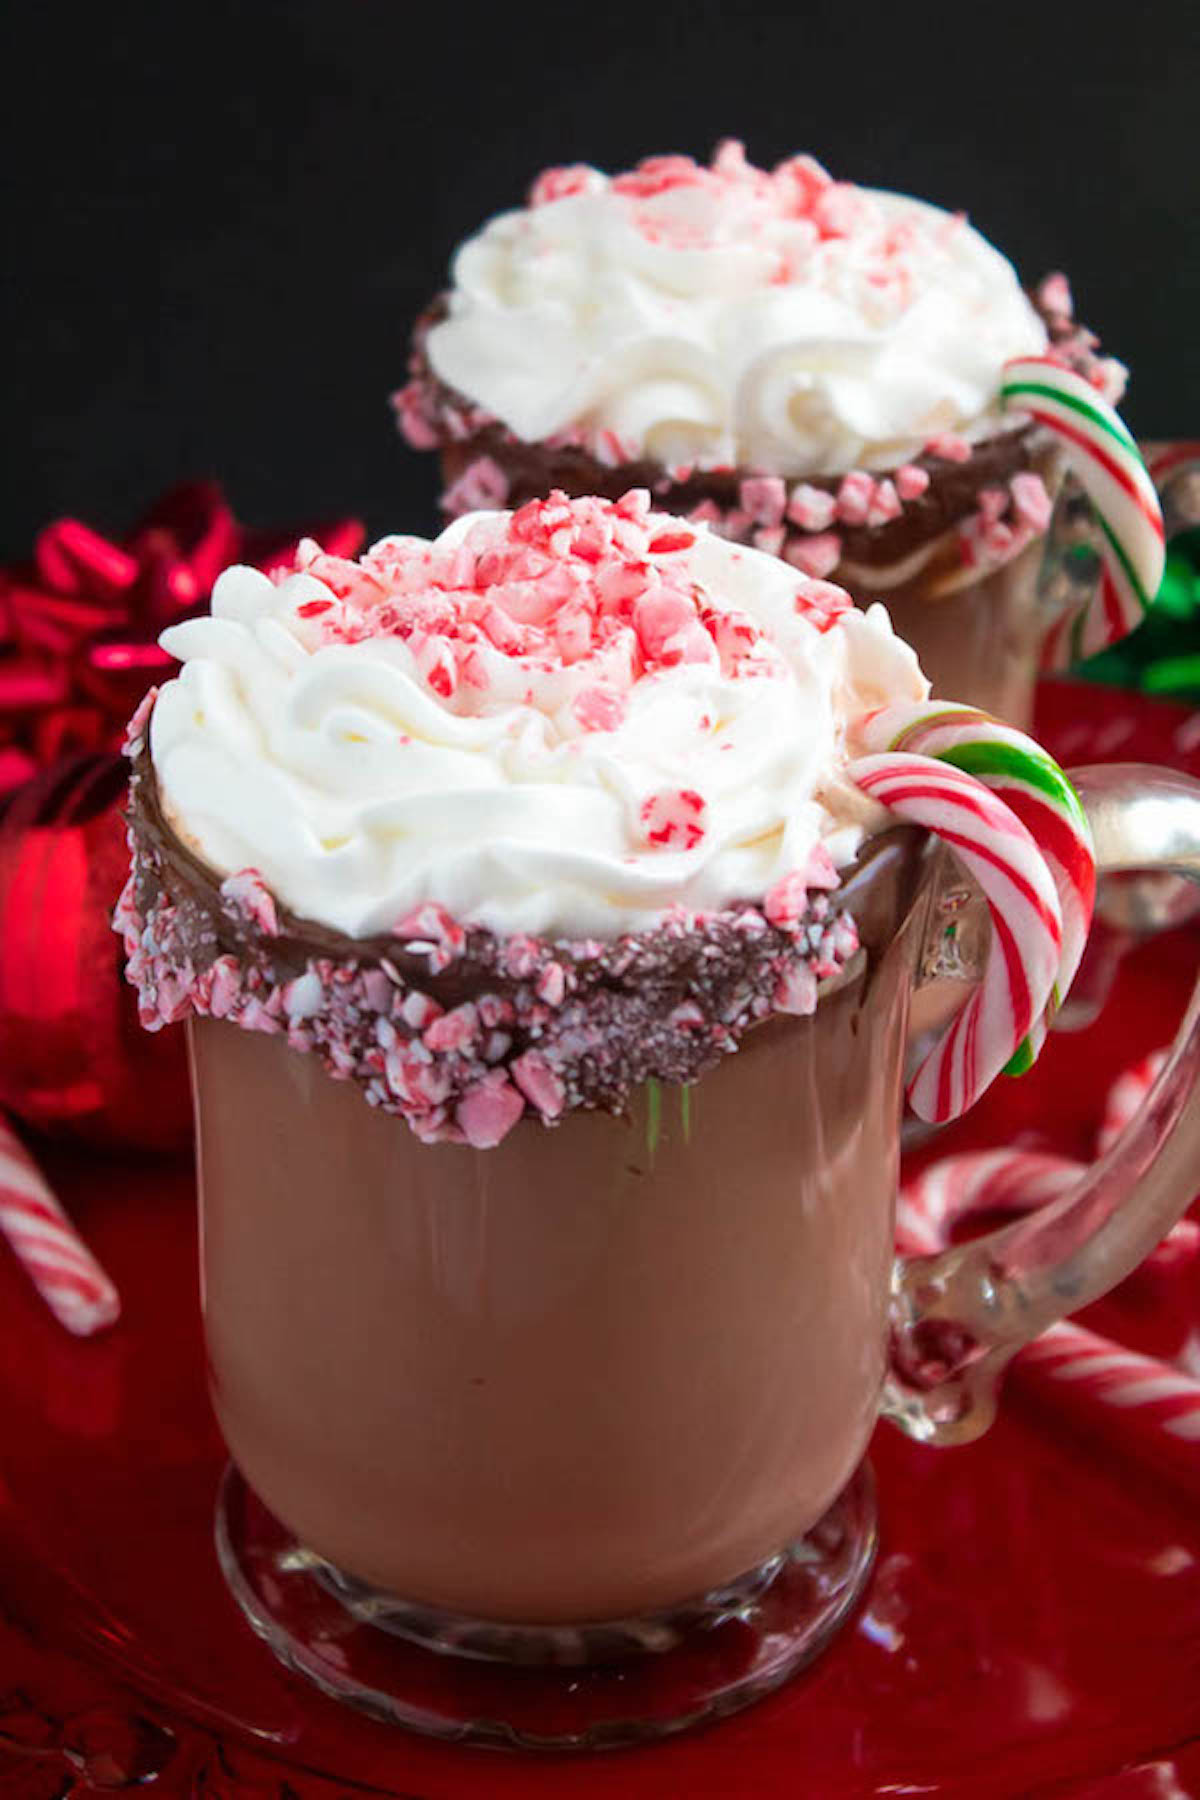 8 Recipes Featuring Christmas Candy Canes For The Festive Season